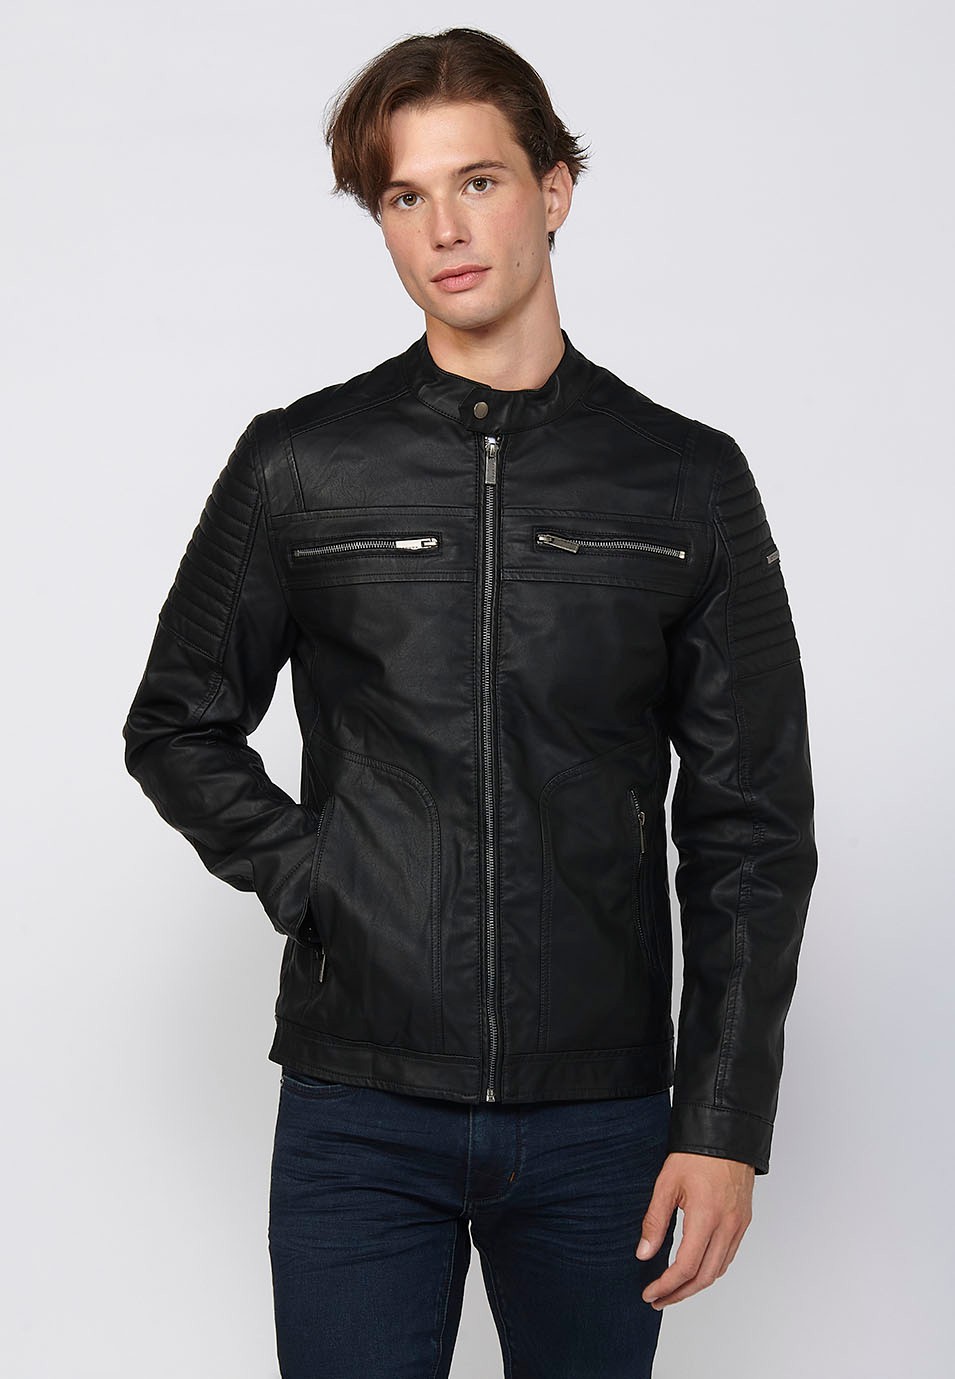 Black Long Sleeve Leather Effect Jacket with Front Zipper Closure and Round Neck for Men